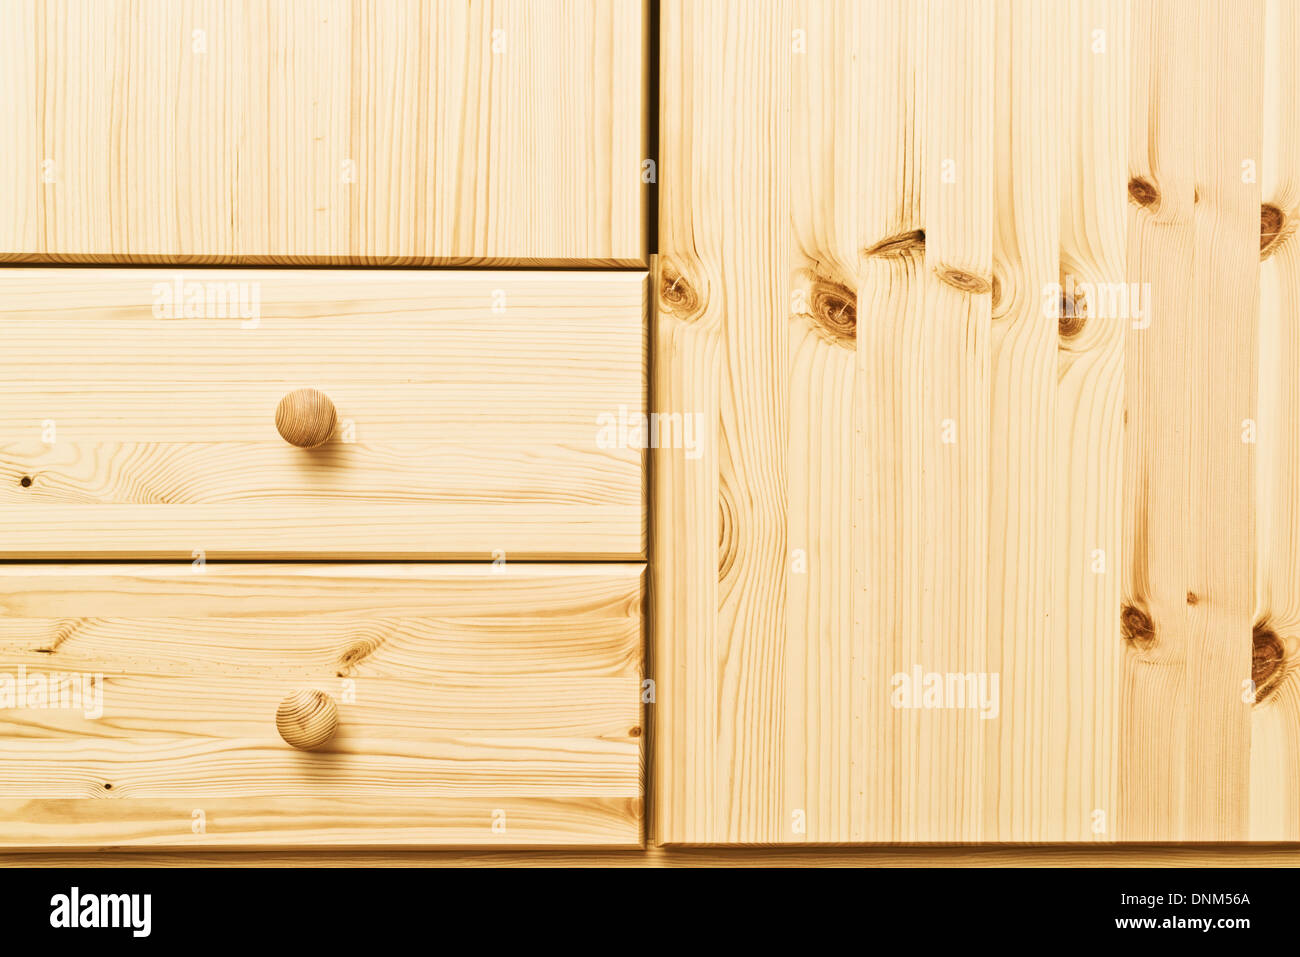 Wooden cabinet drawers with detailed natural wood texture. Home furnishing. Stock Photo